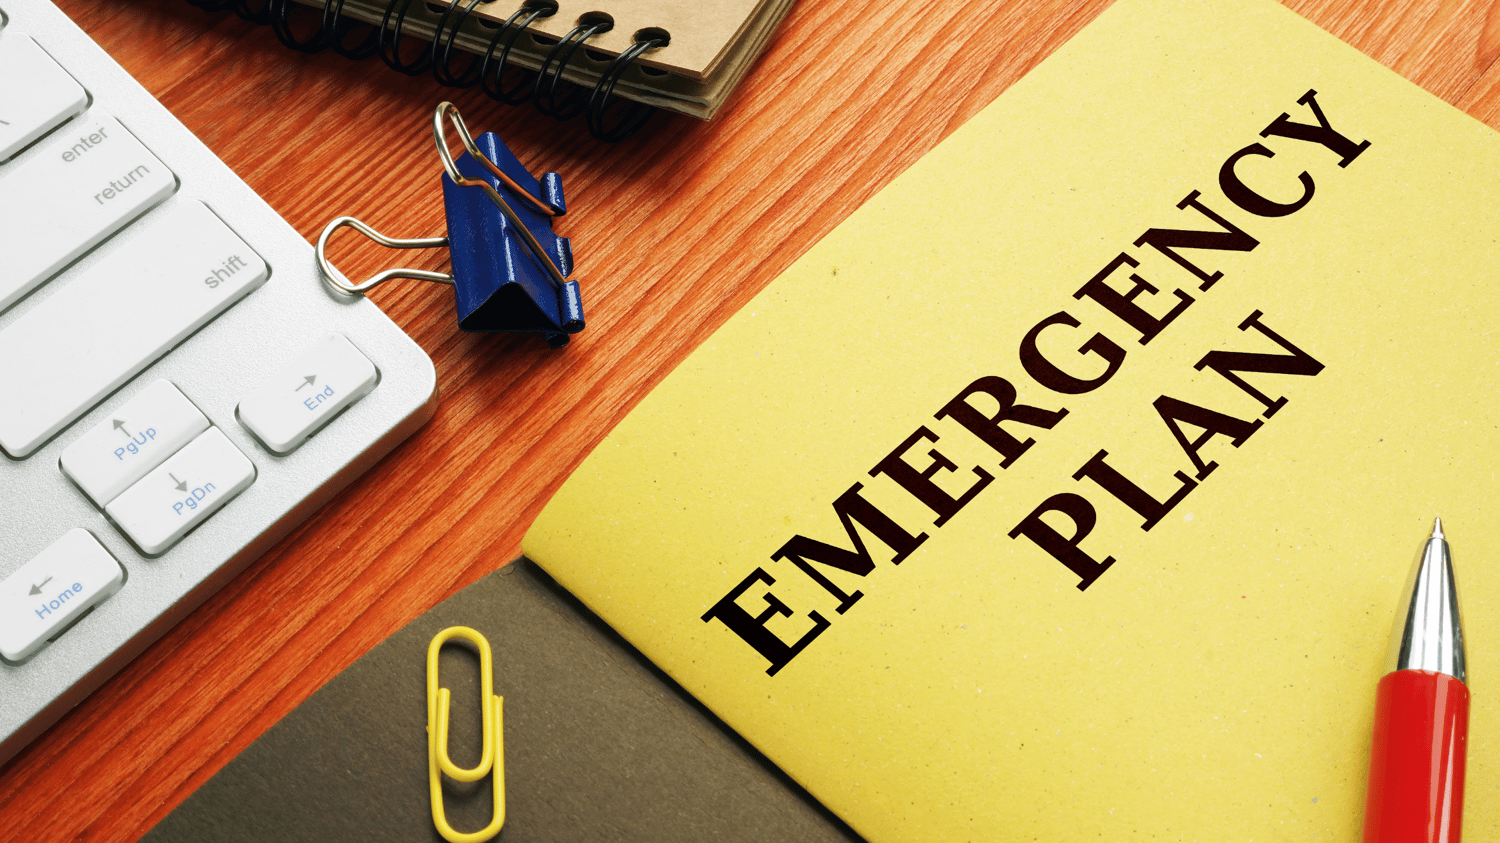 WHY CREATING AN EMERGENCY FINANCIAL FILE SHOULD BE A TOP PRIORITY FOR EVERY ADULT